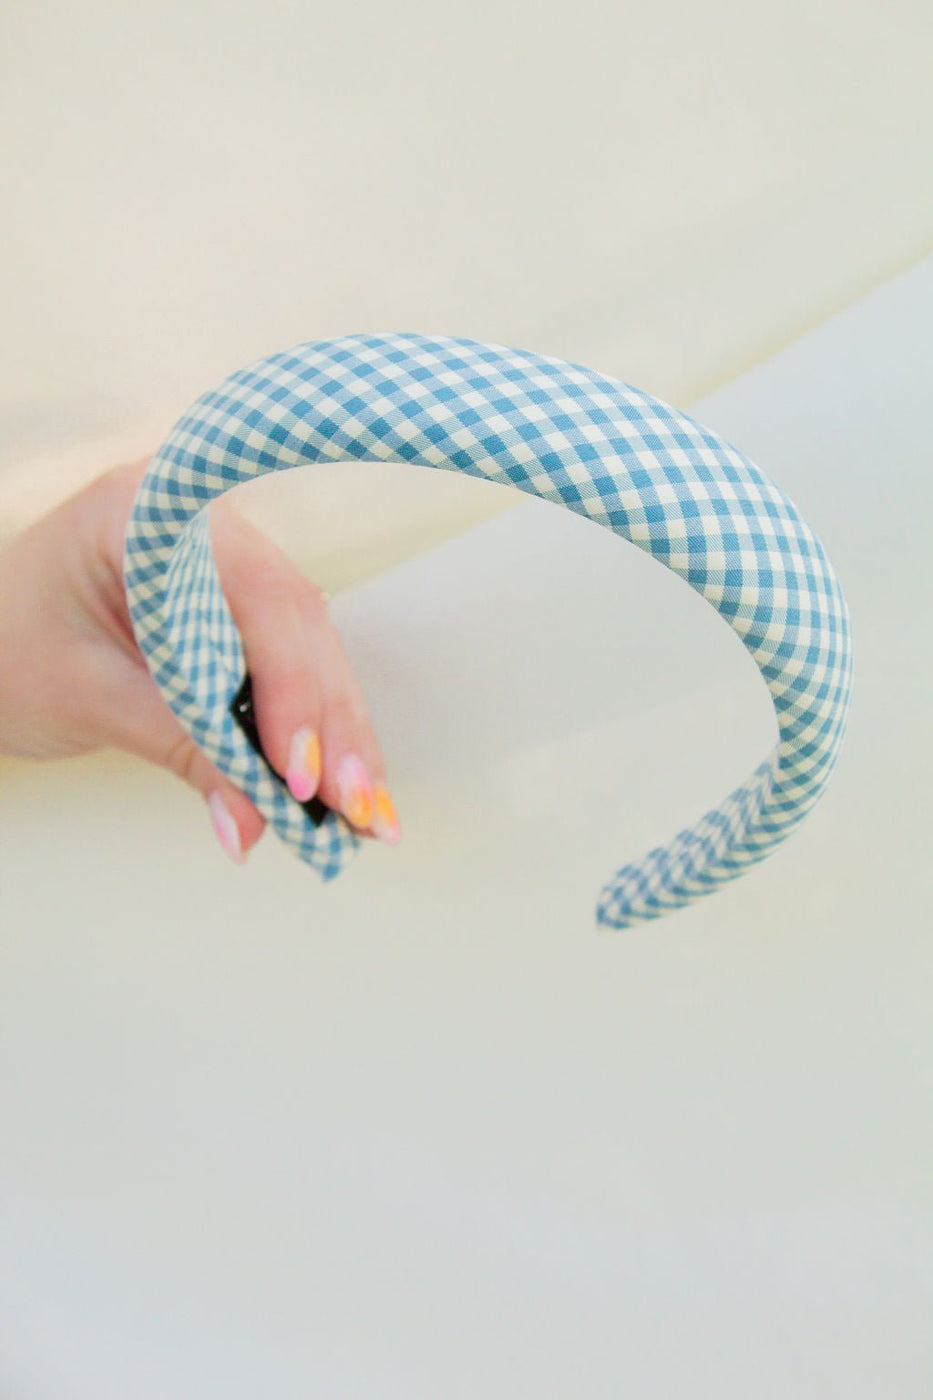 a hand holding a blue and white headband